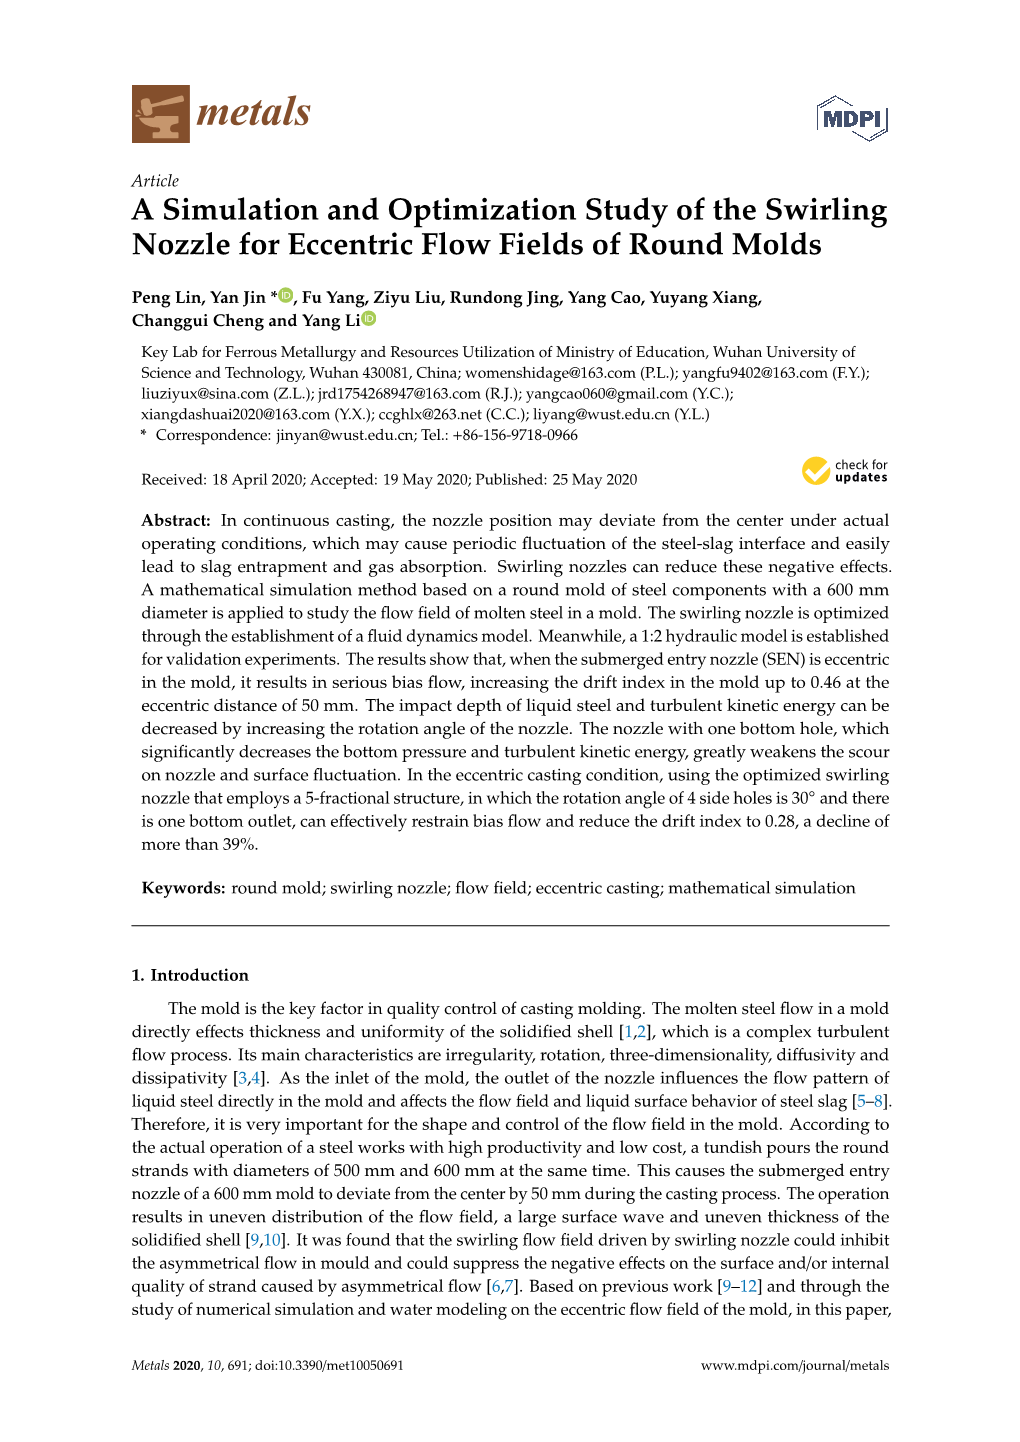 A Simulation and Optimization Study of the Swirling Nozzle for Eccentric Flow Fields of Round Molds